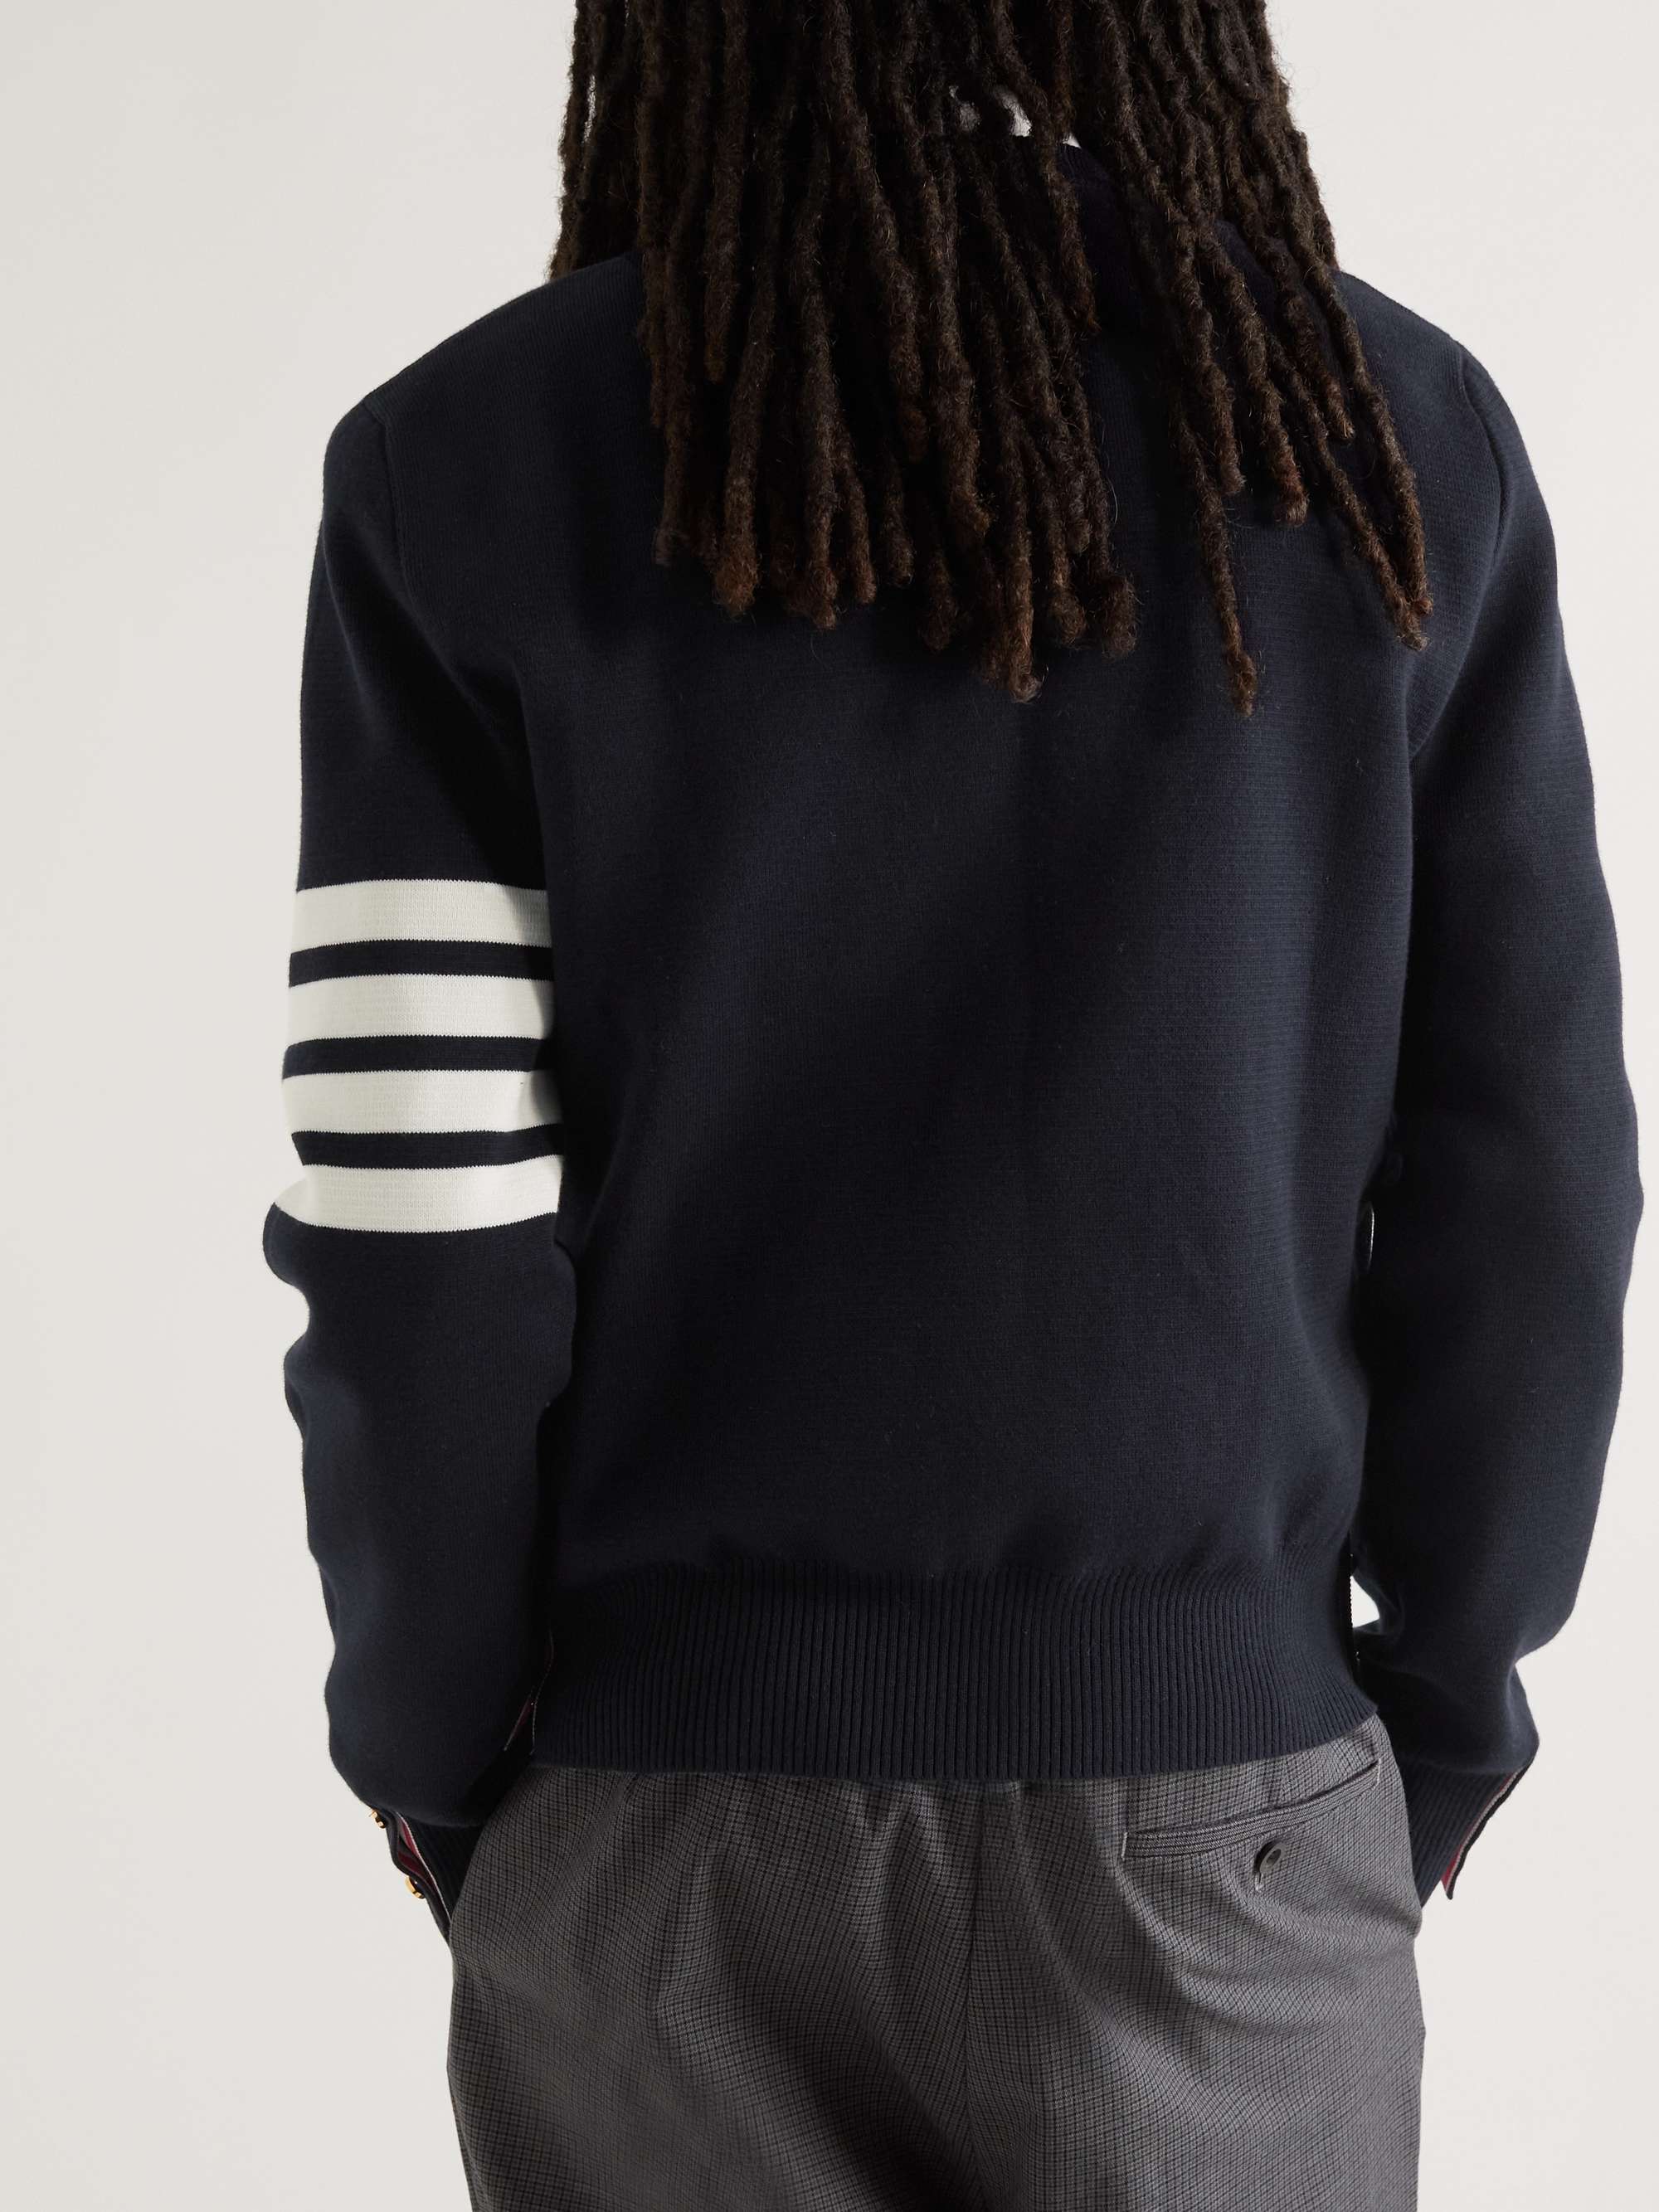 THOM BROWNE Striped Grosgrain-Trimmed Cotton Sweater